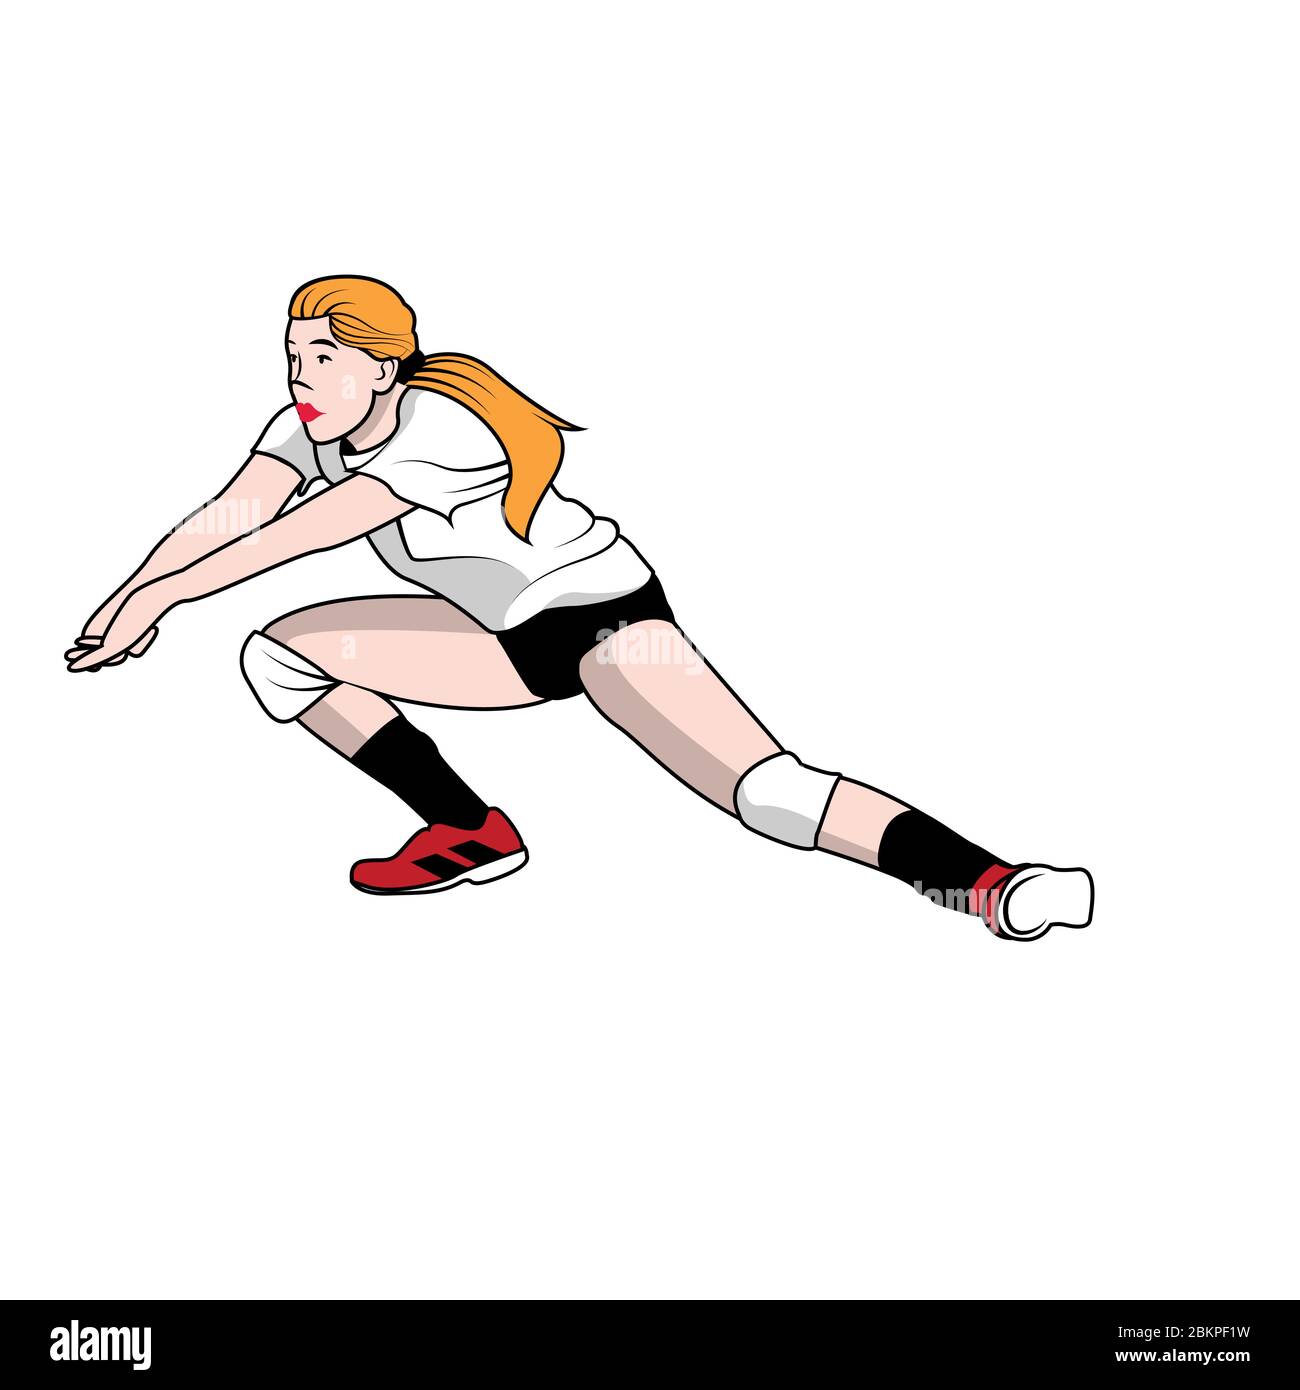 Woman Playing Volleyball In Black And White Uniform Stock Vector Image